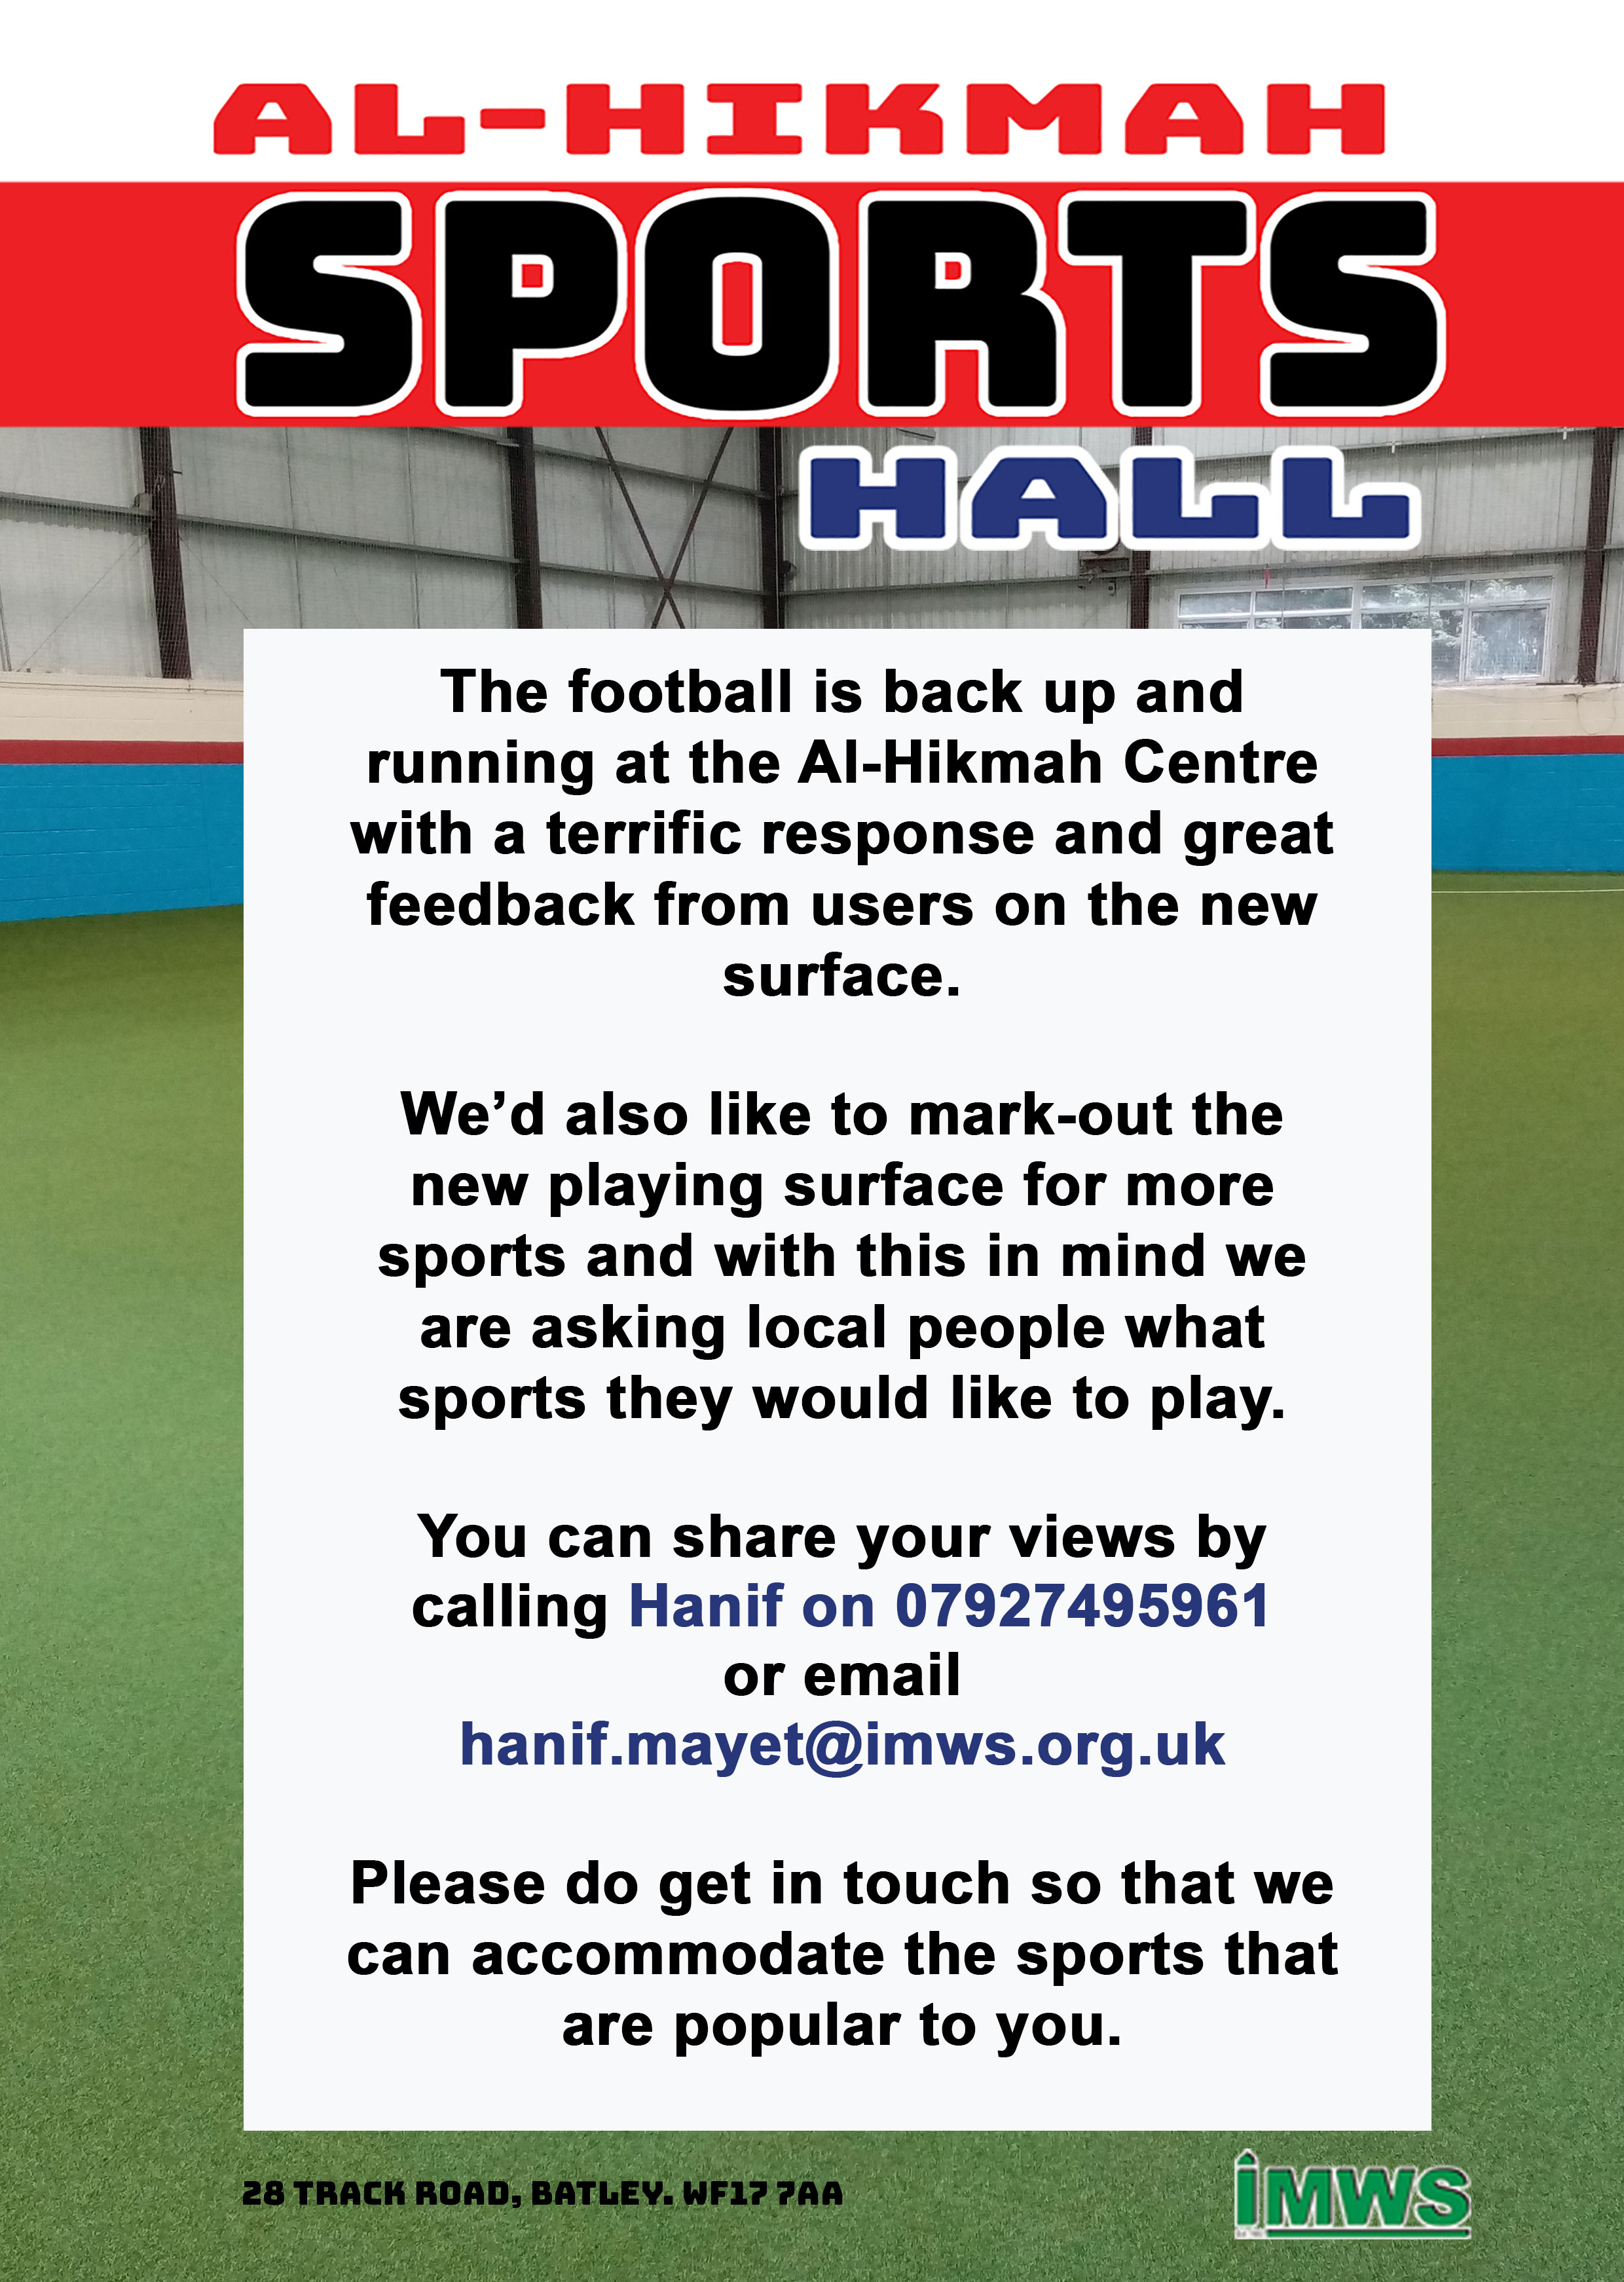 What sports would you like to play in the Al-Hikmah Sports hall